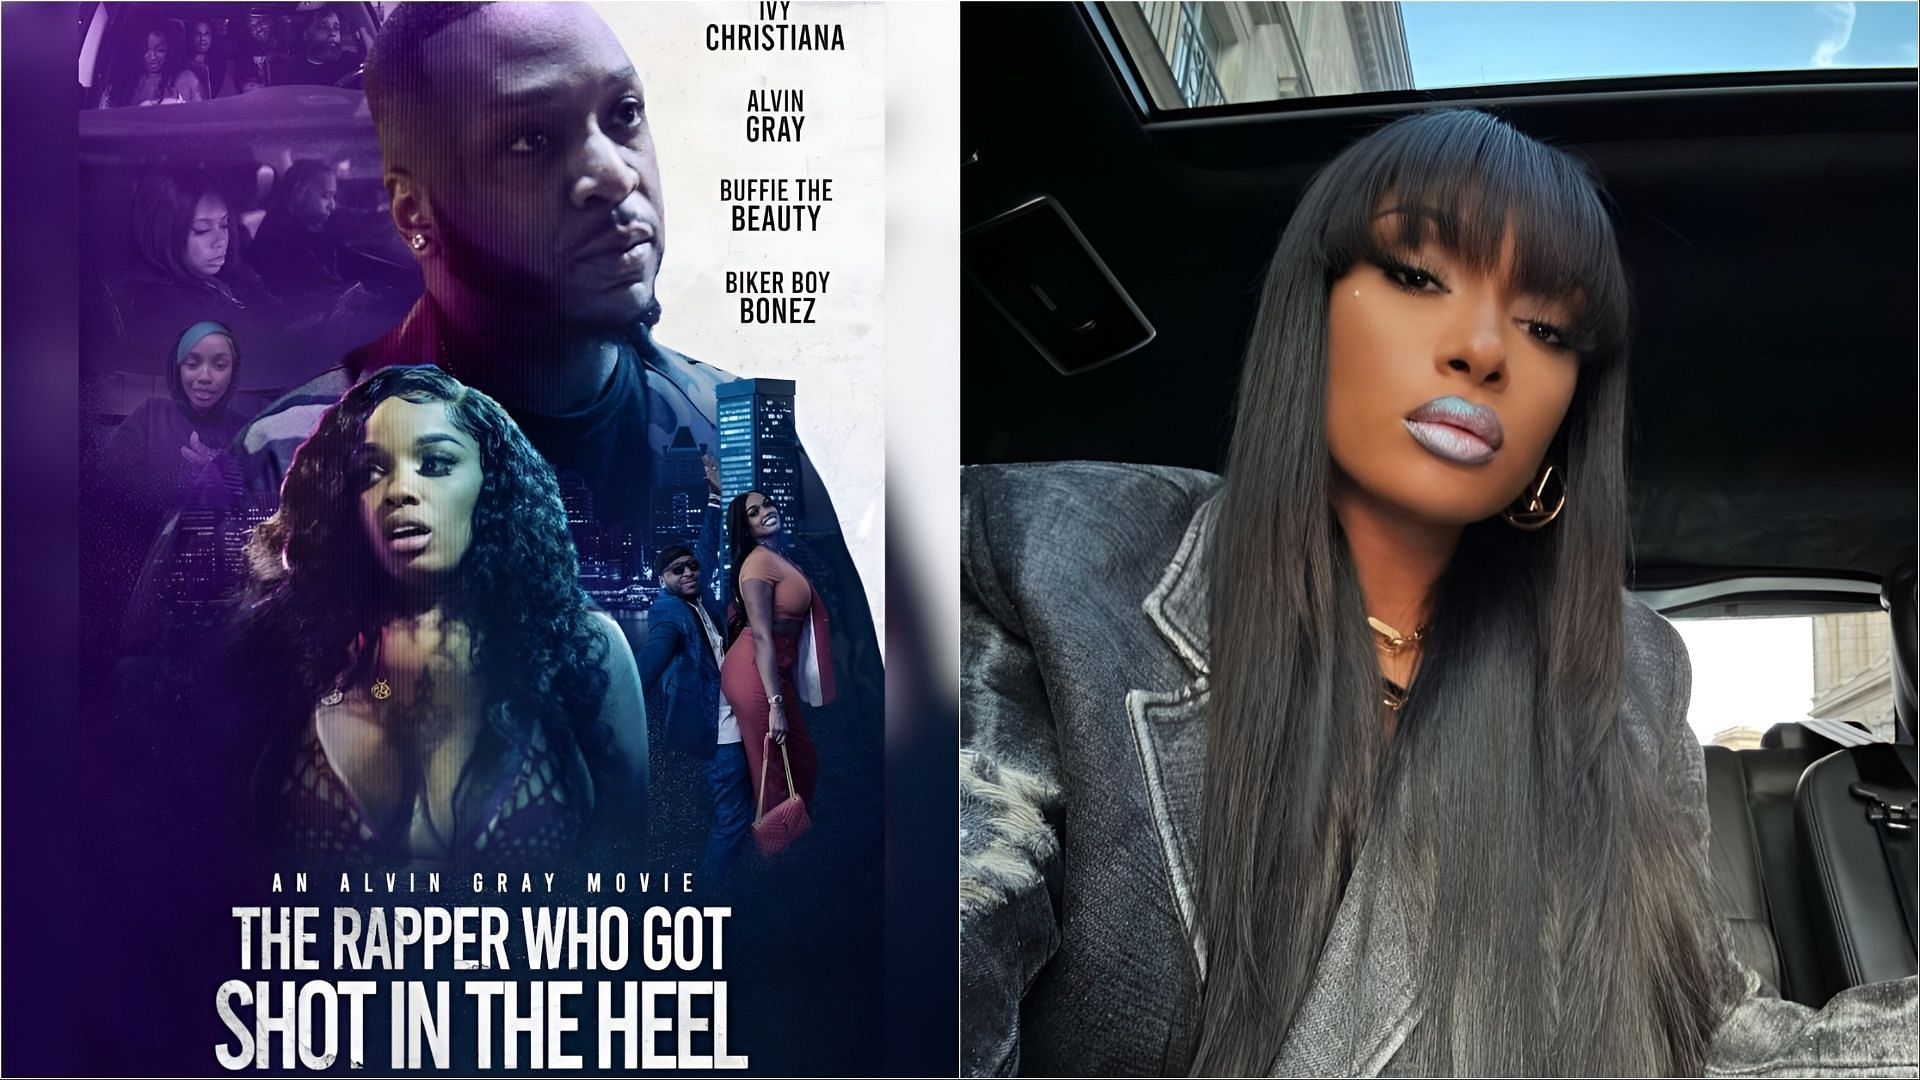 The Rapper Who Got Shot in the Heel was compared to Megan Thee Stallion